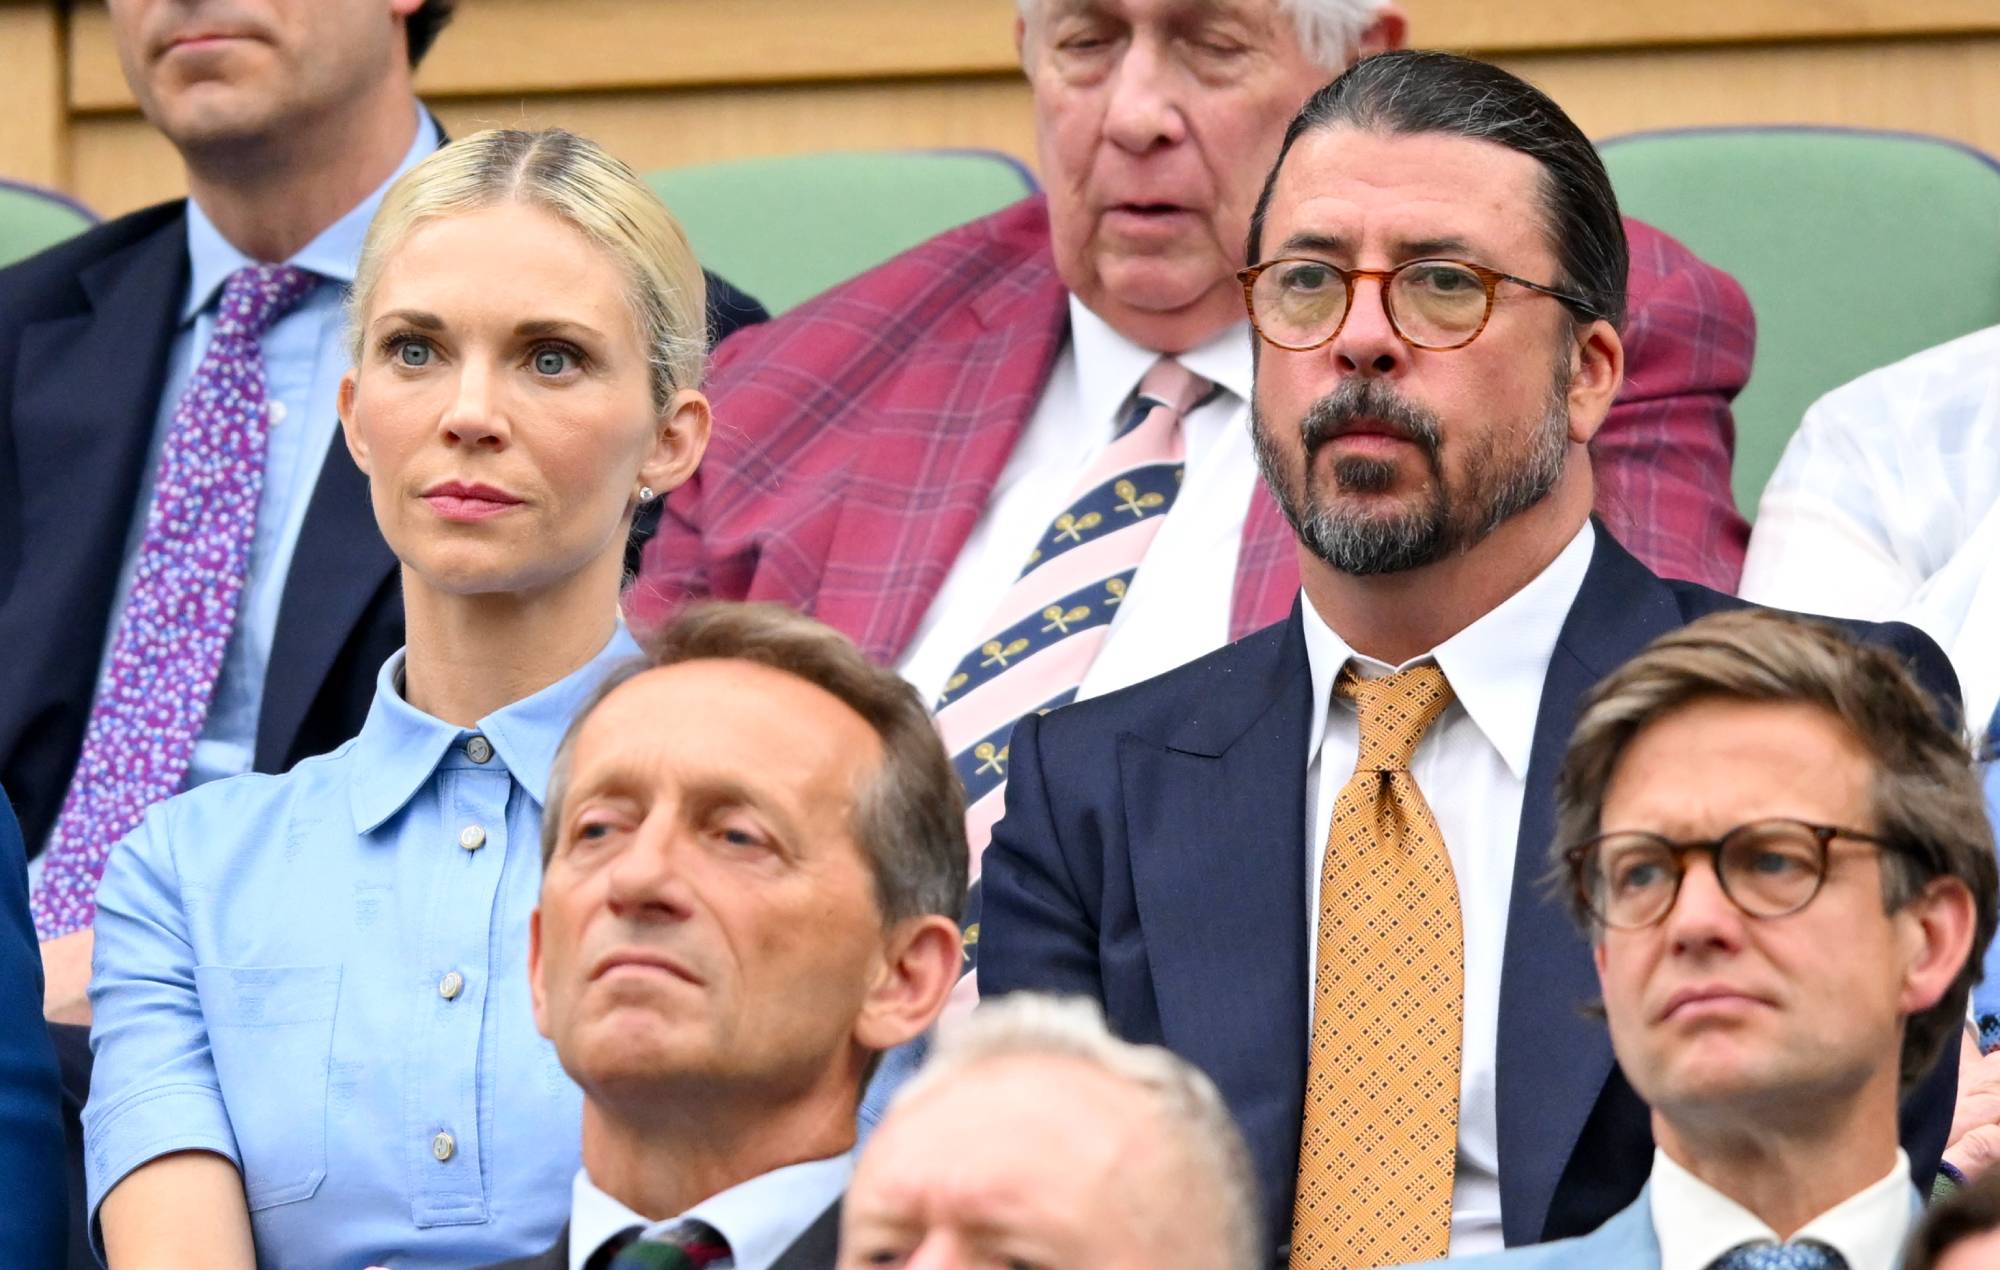 Dave Grohl attends Wimbledon and gives his tournament predictions